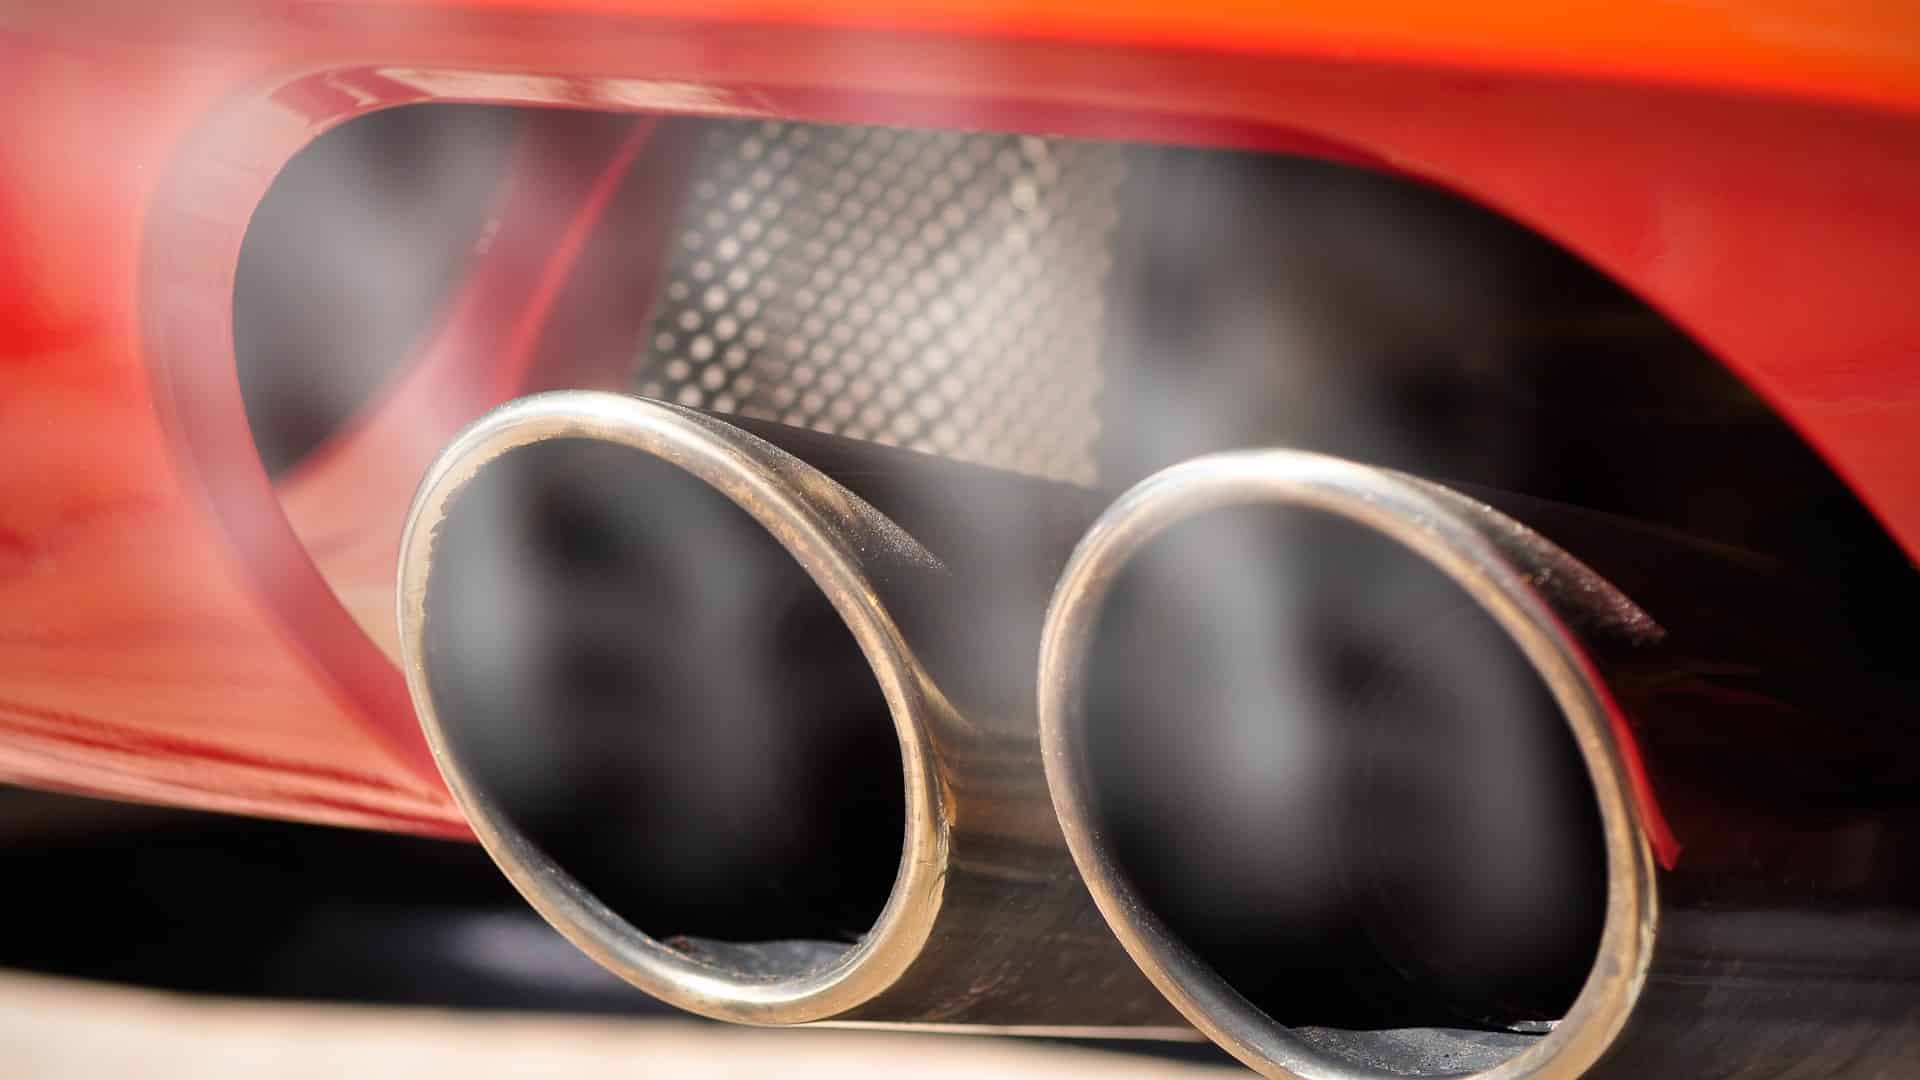 Smoky Exhaust Pipe